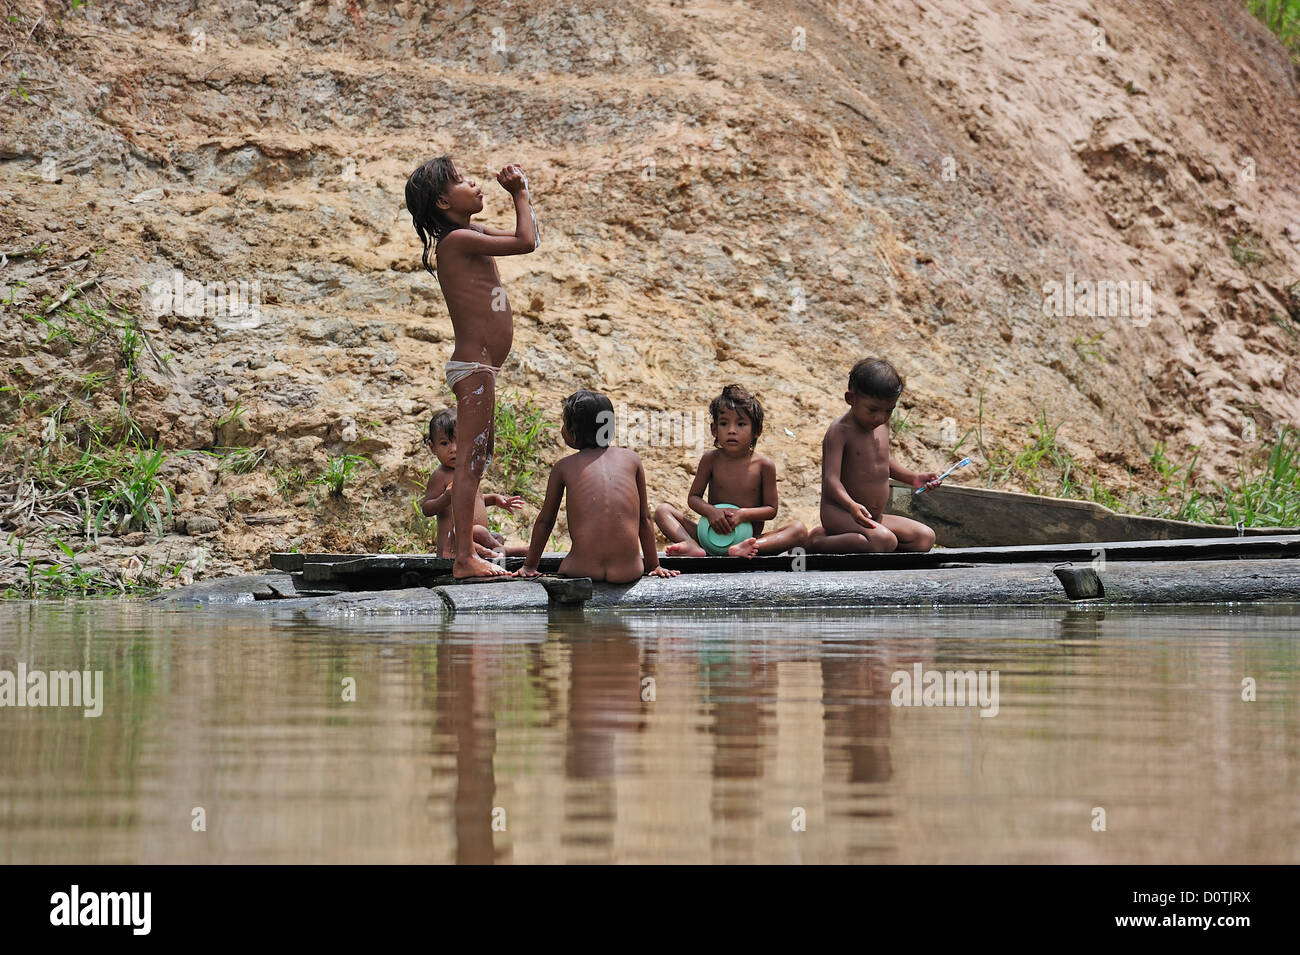 Indian kids, bathing, playing water, Indigenous, Indian tribe, Amacayon, Ticuna, Indians, Amazon, River, Puerto Narino, Colombia Stock Photo